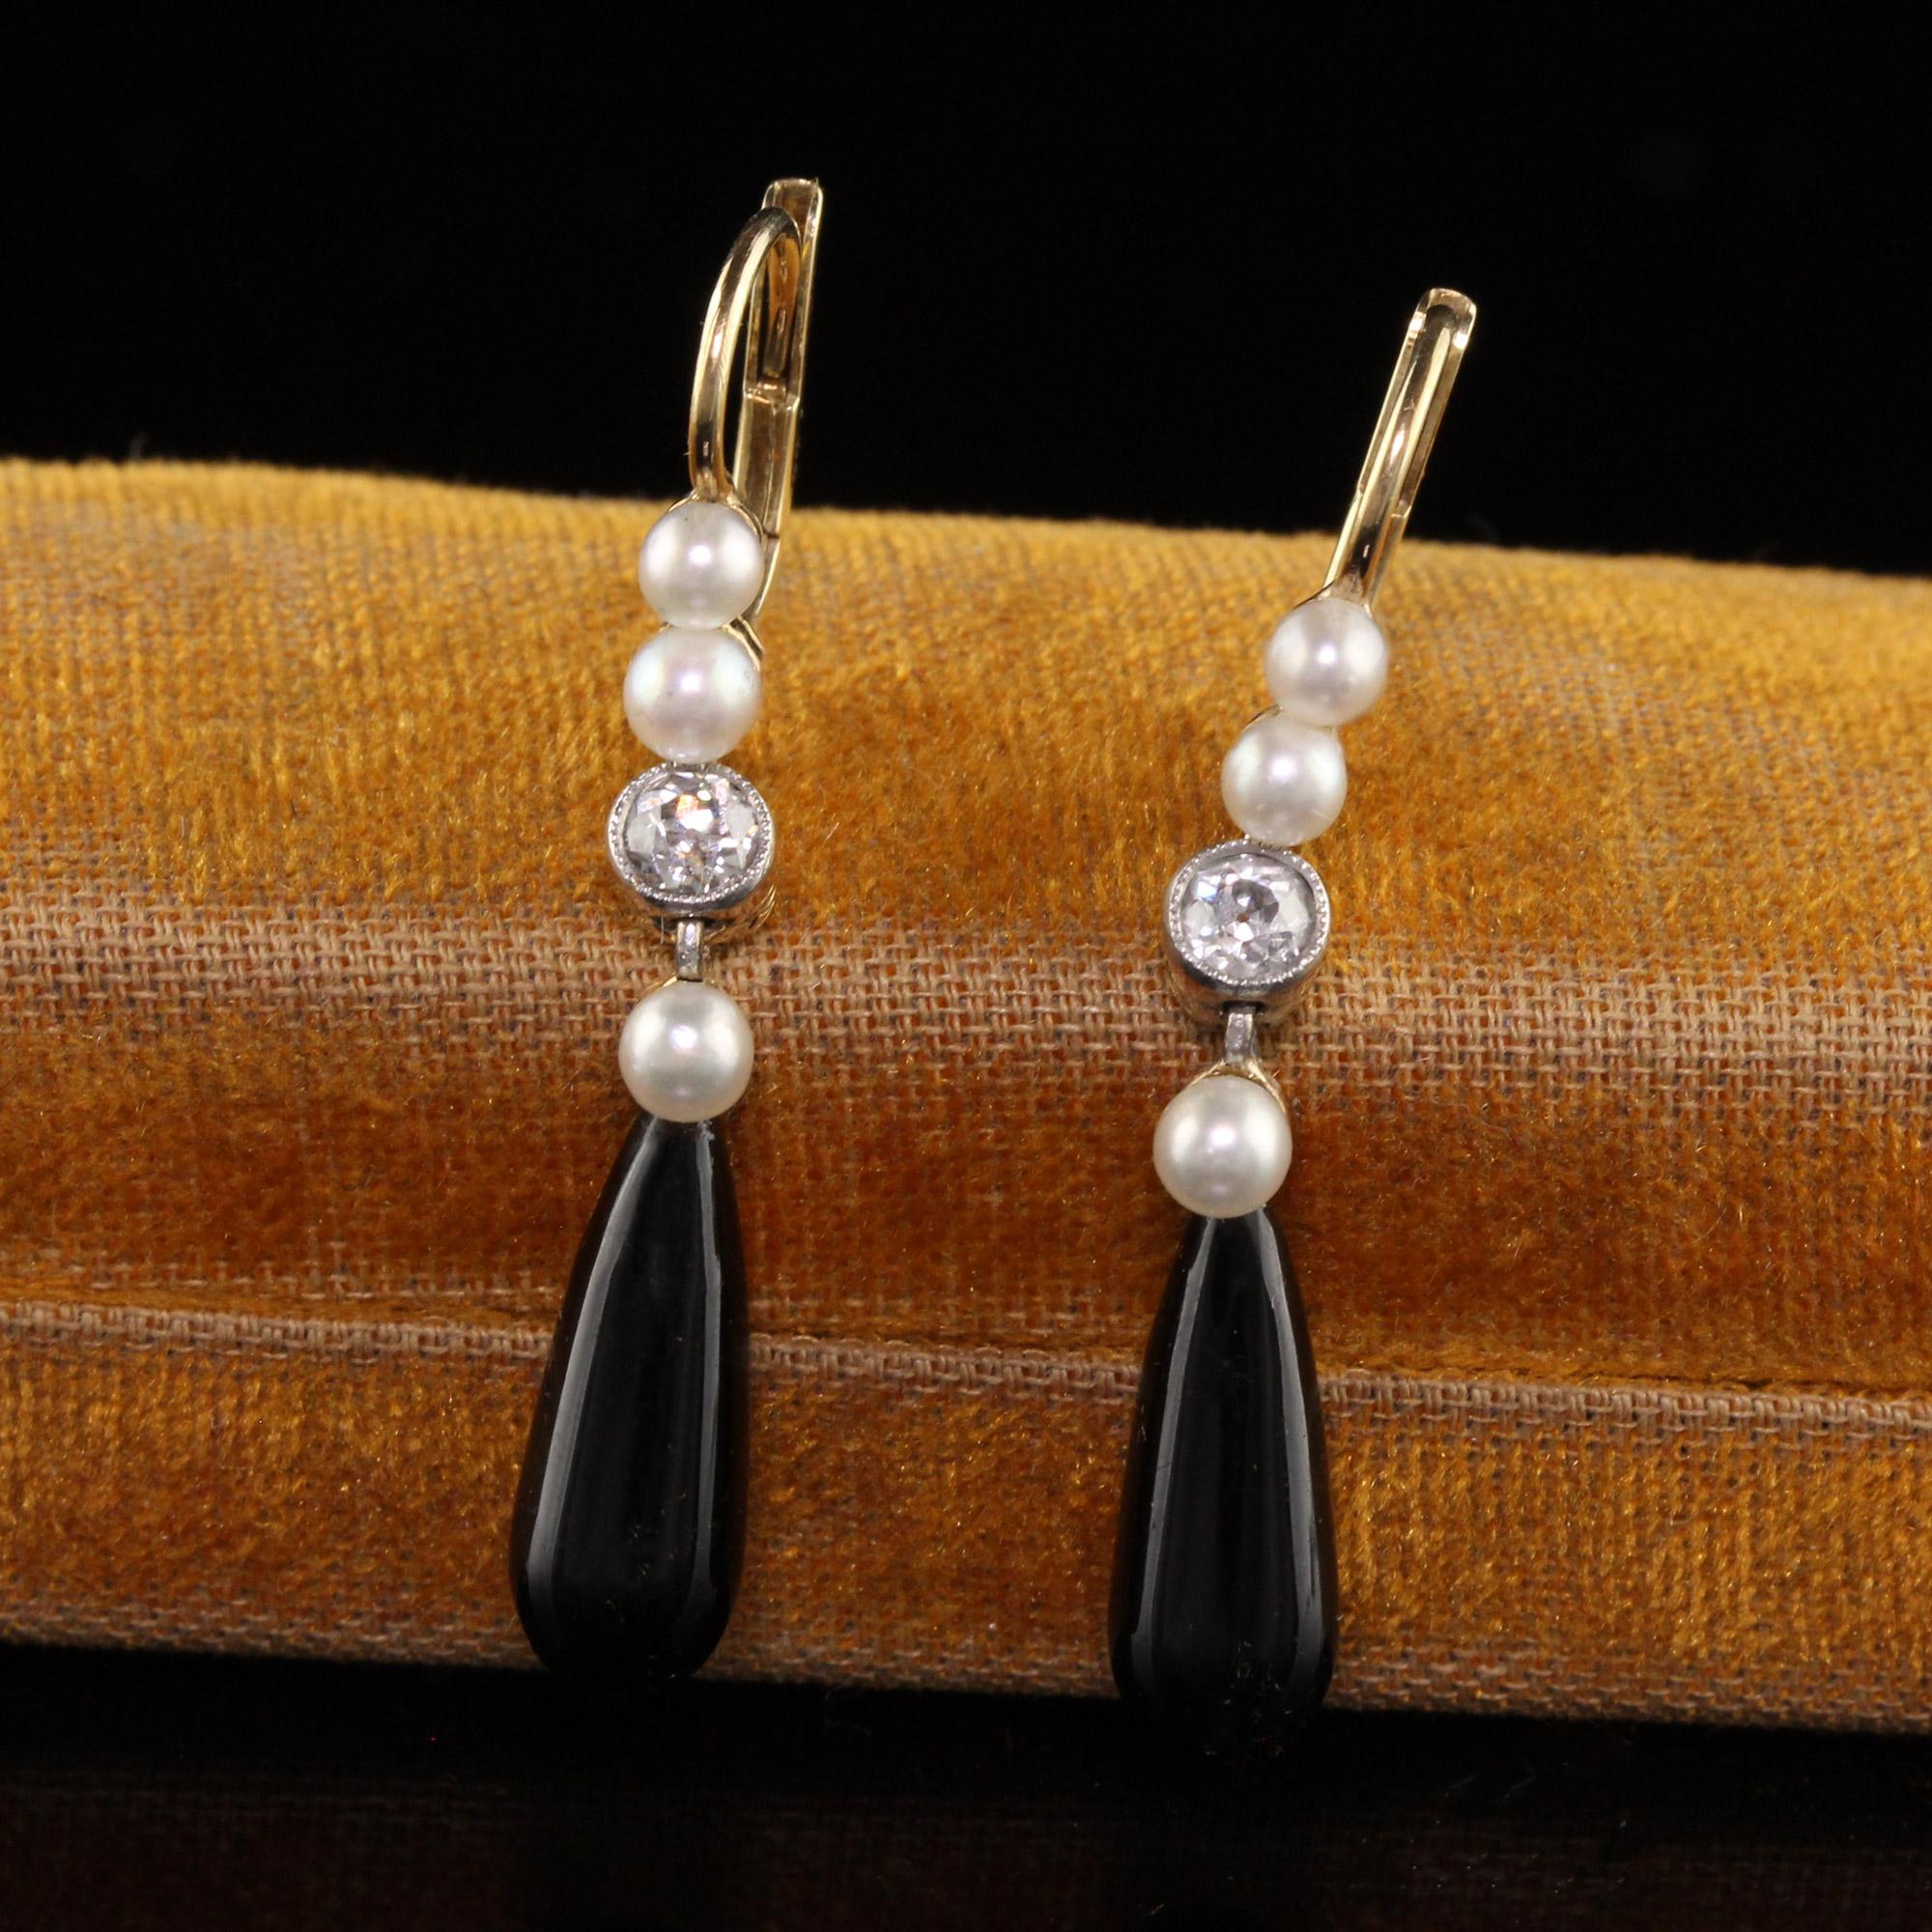 Antique Art Deco 14k Yellow Gold Old European Diamond and Onyx Drop Earrings In Good Condition For Sale In Great Neck, NY